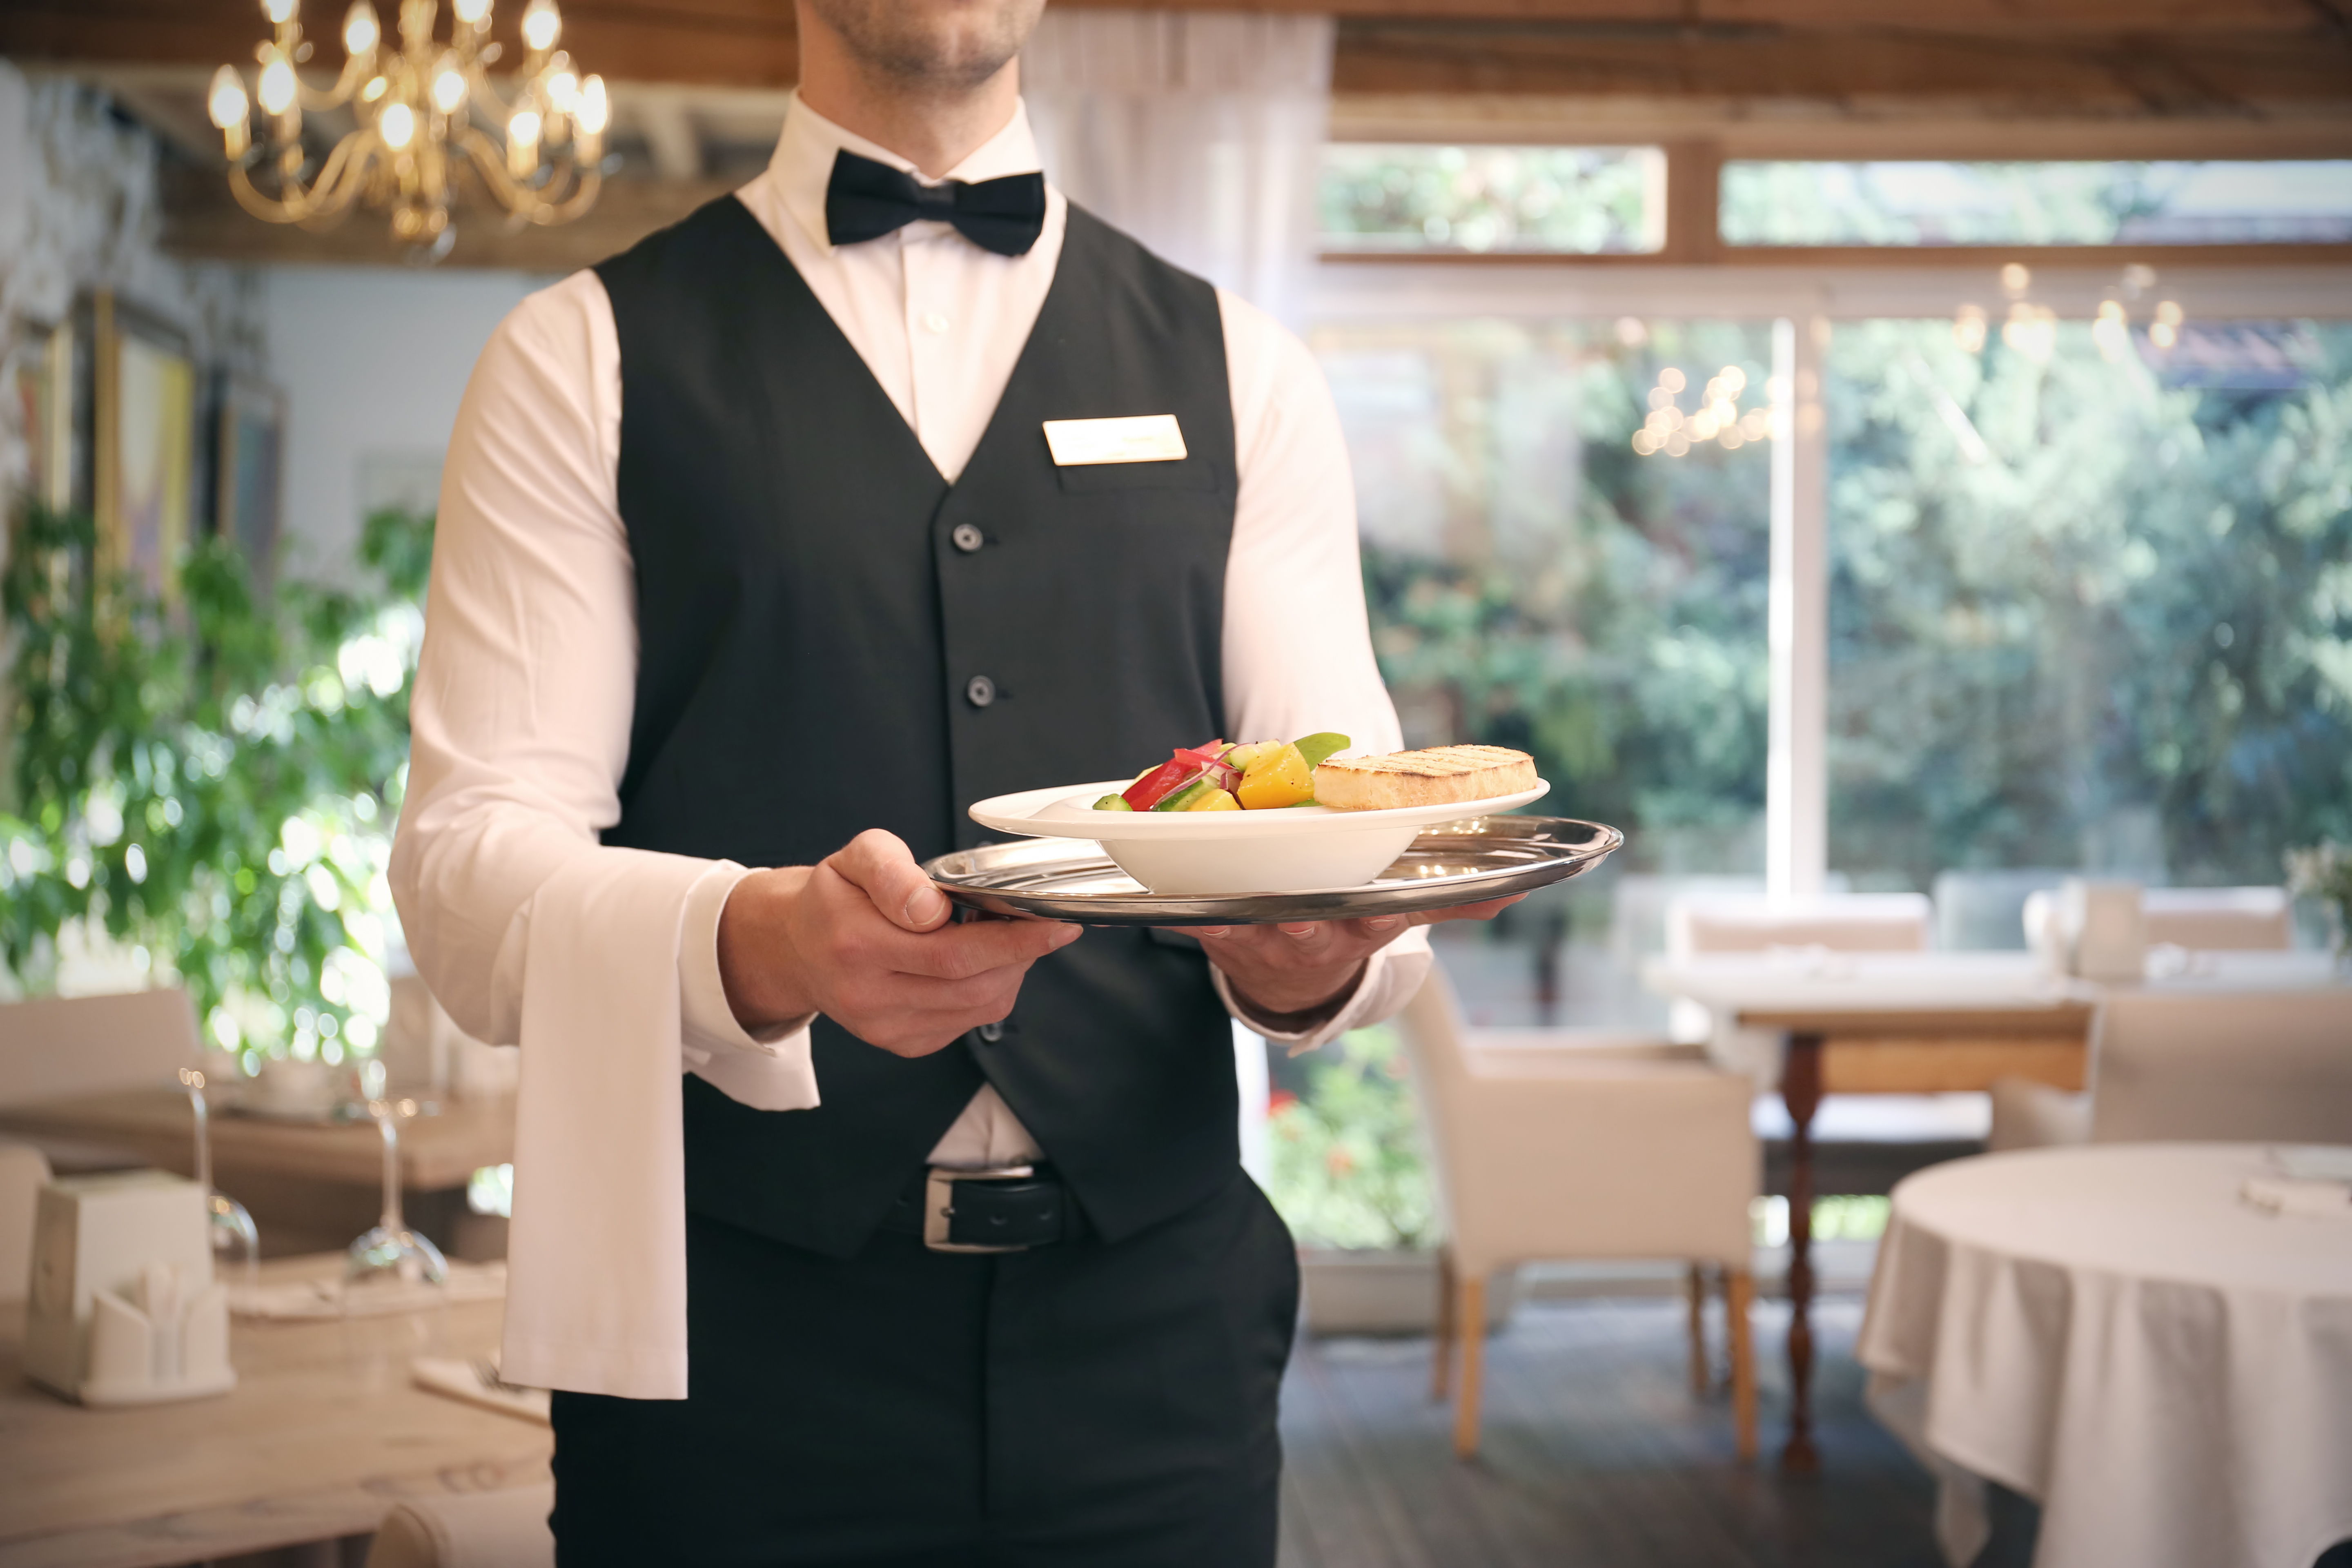 A waiter serves the food in the restaurant | Source: Shutterstock